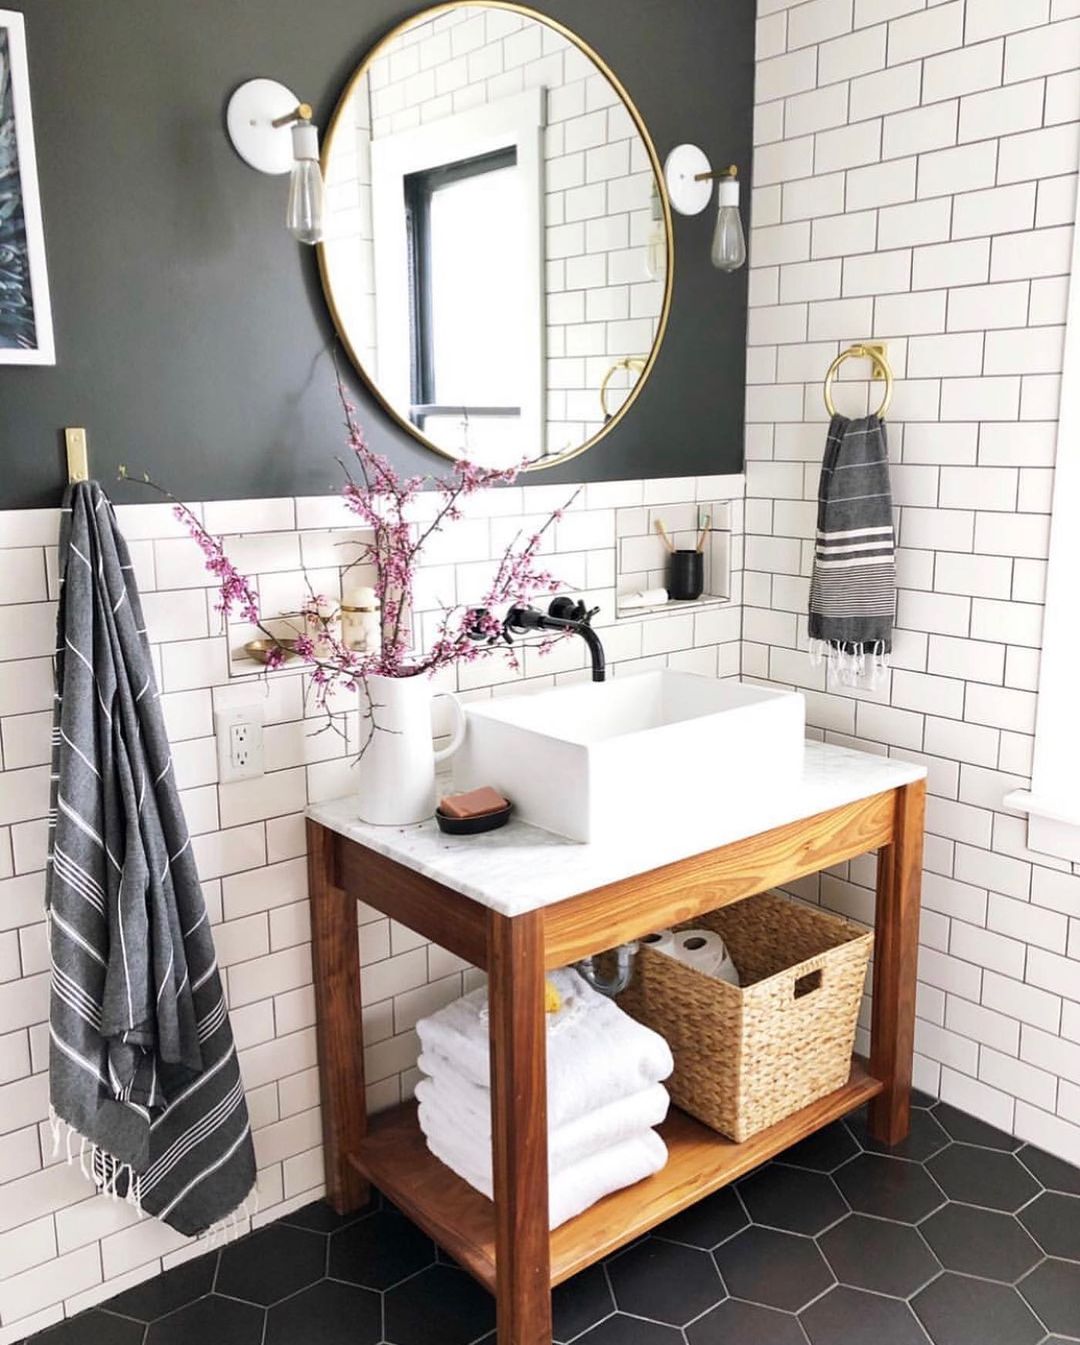 Bathroom with gray VOC-free paint. Photo by Instagram user @carpendaughter